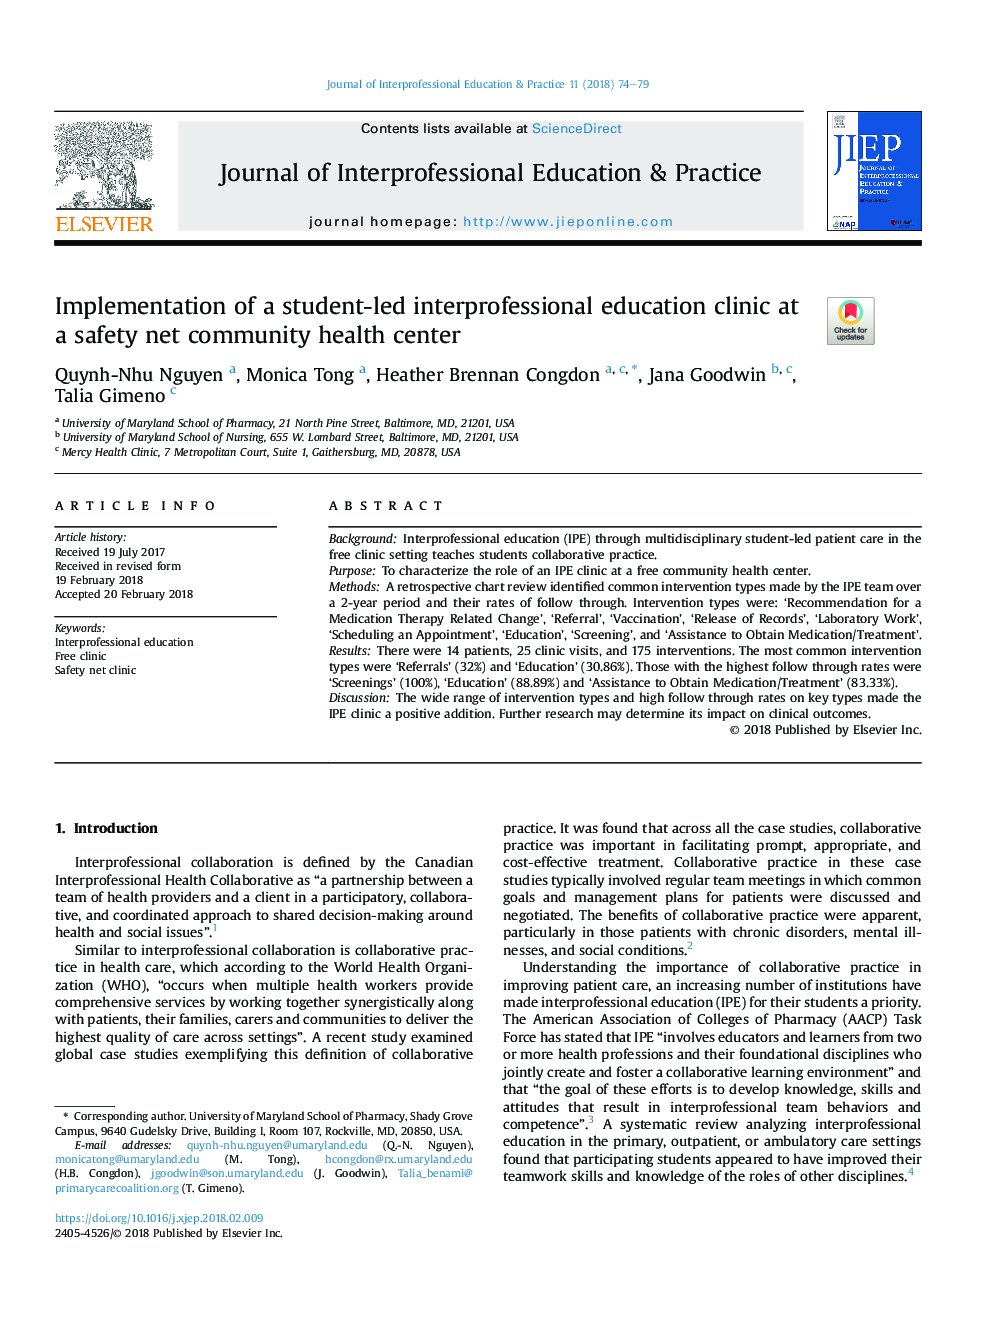 Implementation of a student-led interprofessional education clinic at a safety net community health center